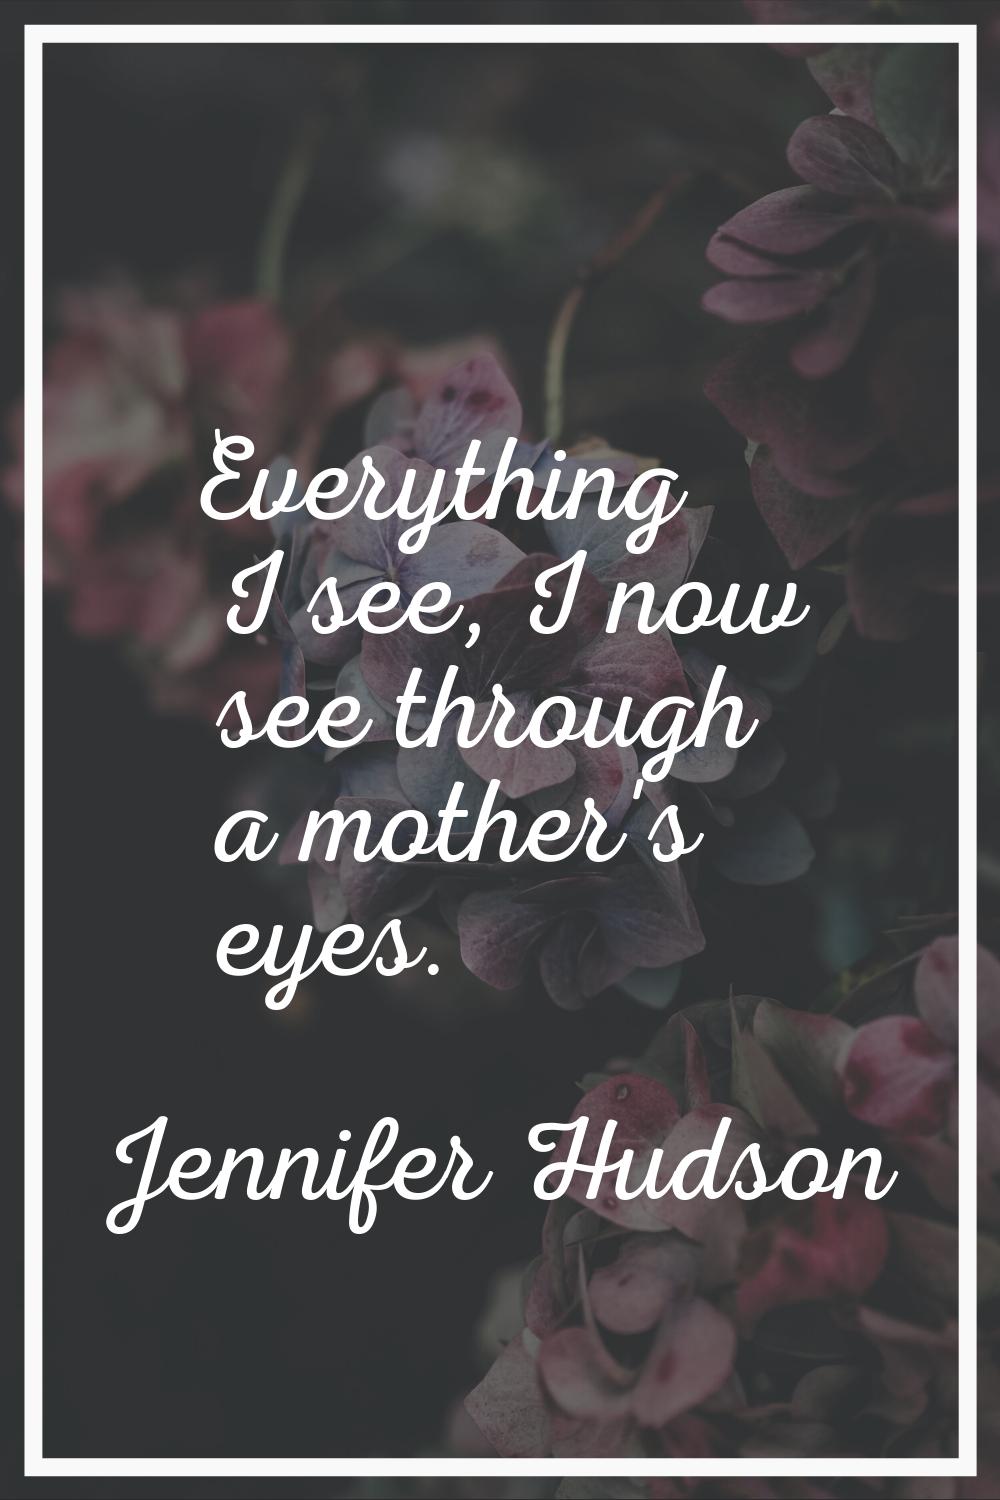 Everything I see, I now see through a mother's eyes.